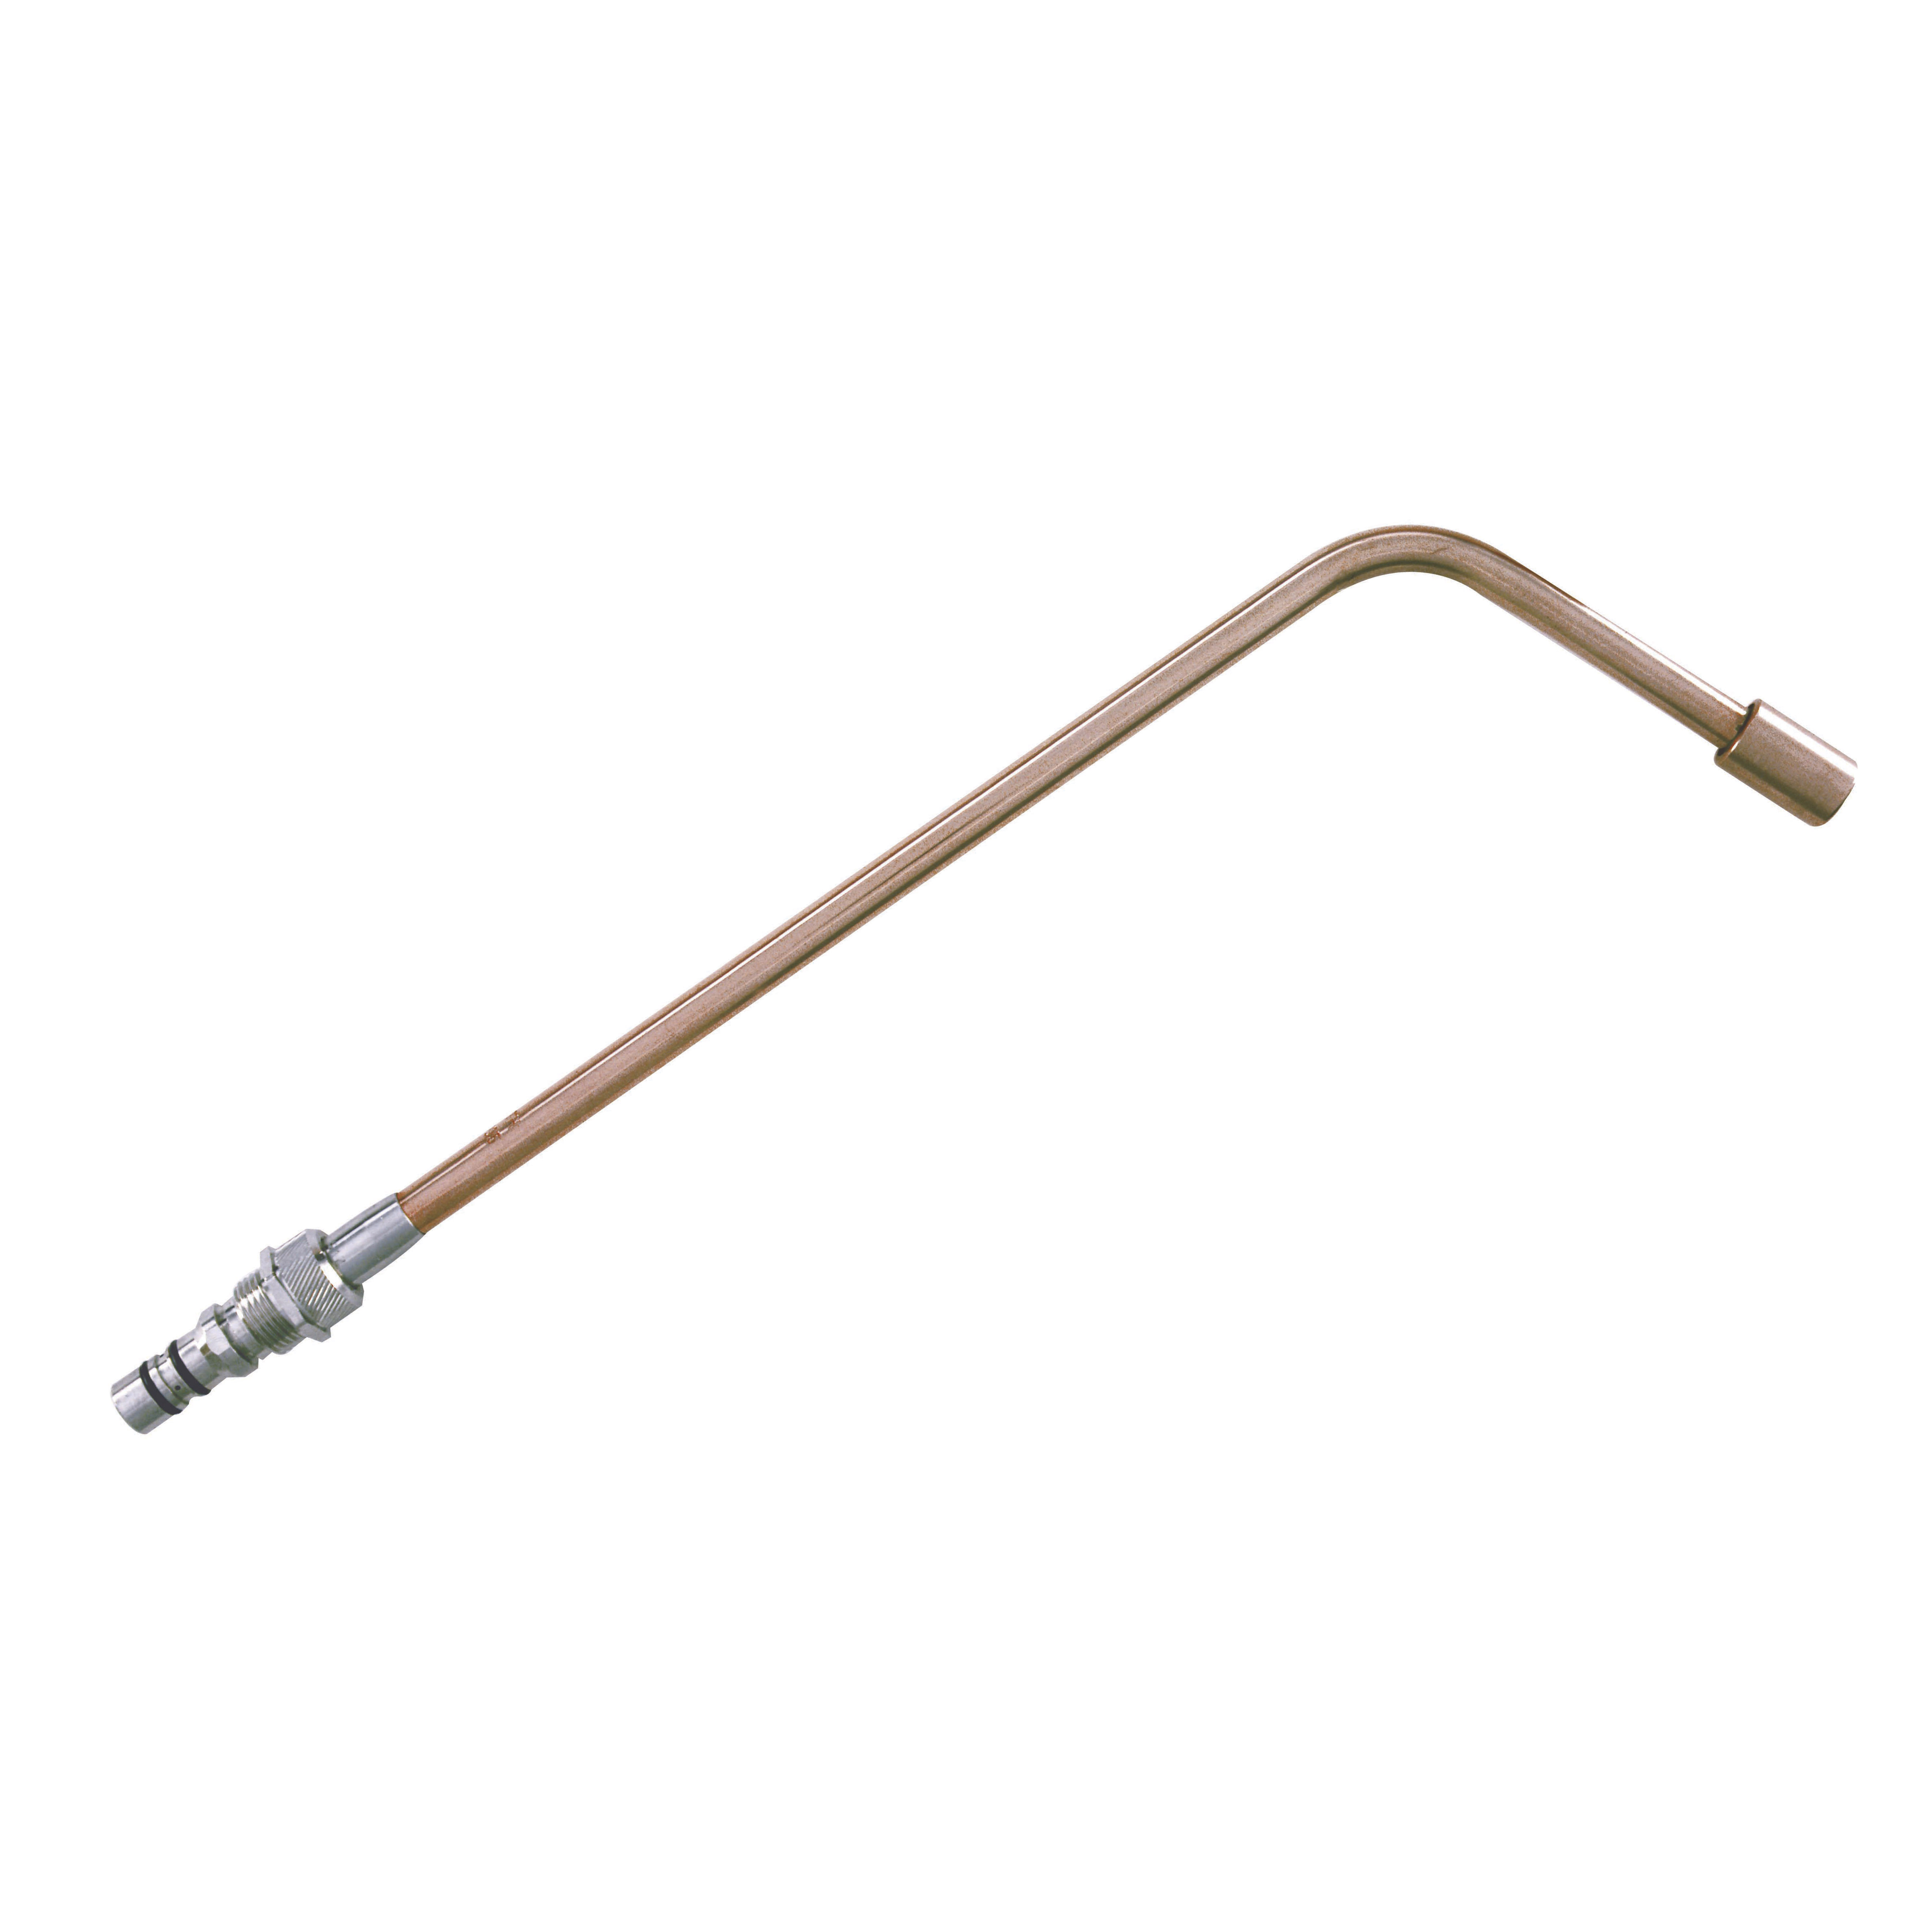 Miller Electric Company® ST603 Heating Tip Acetylene-Size: 70,750 BTU